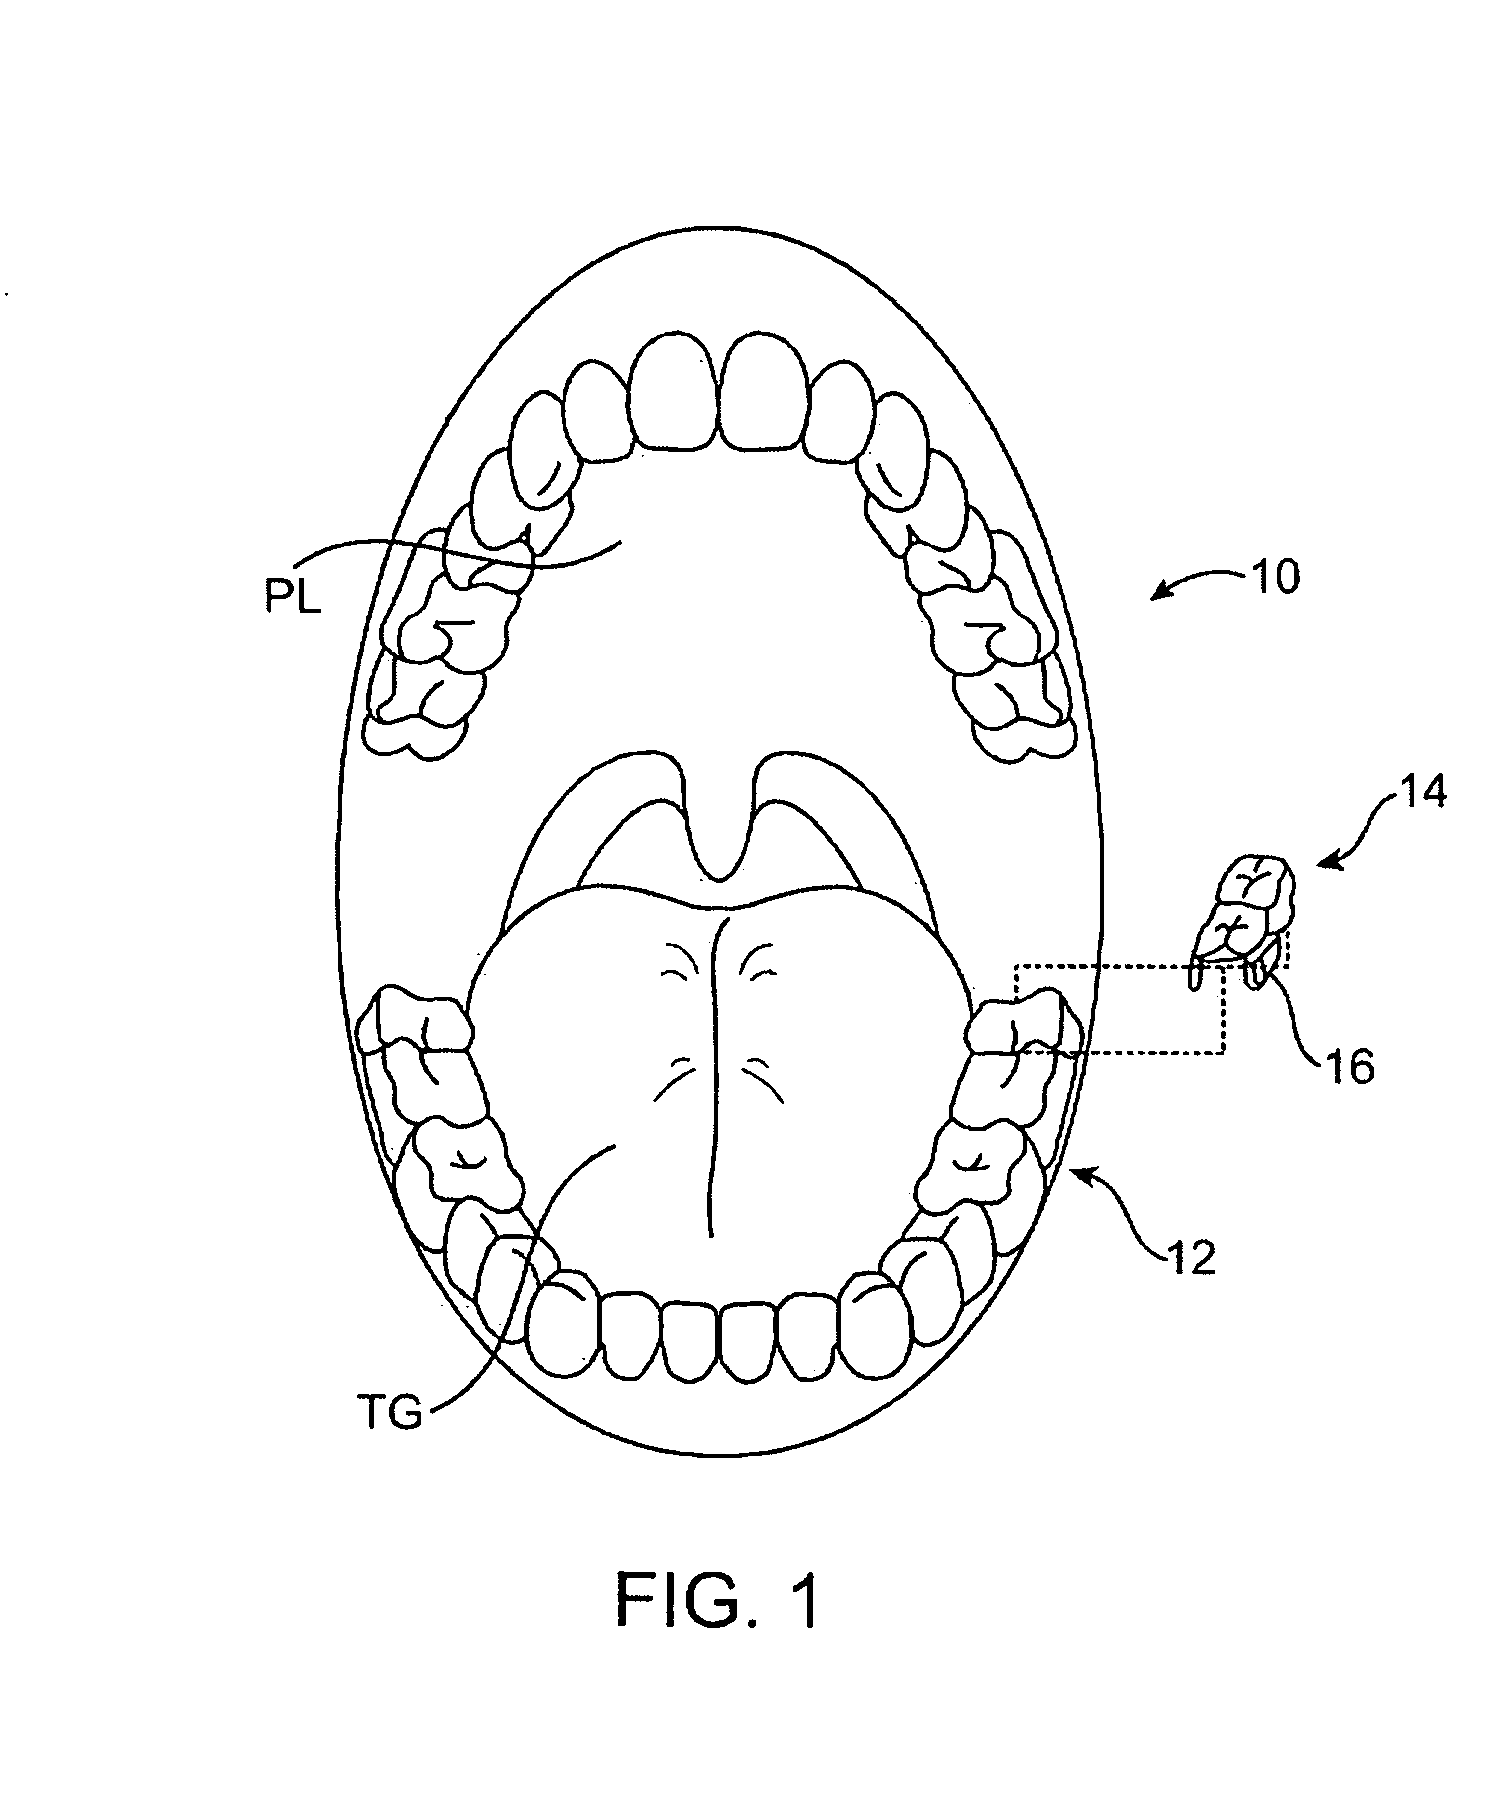 Systems for manufacturing oral-based hearing aid appliances